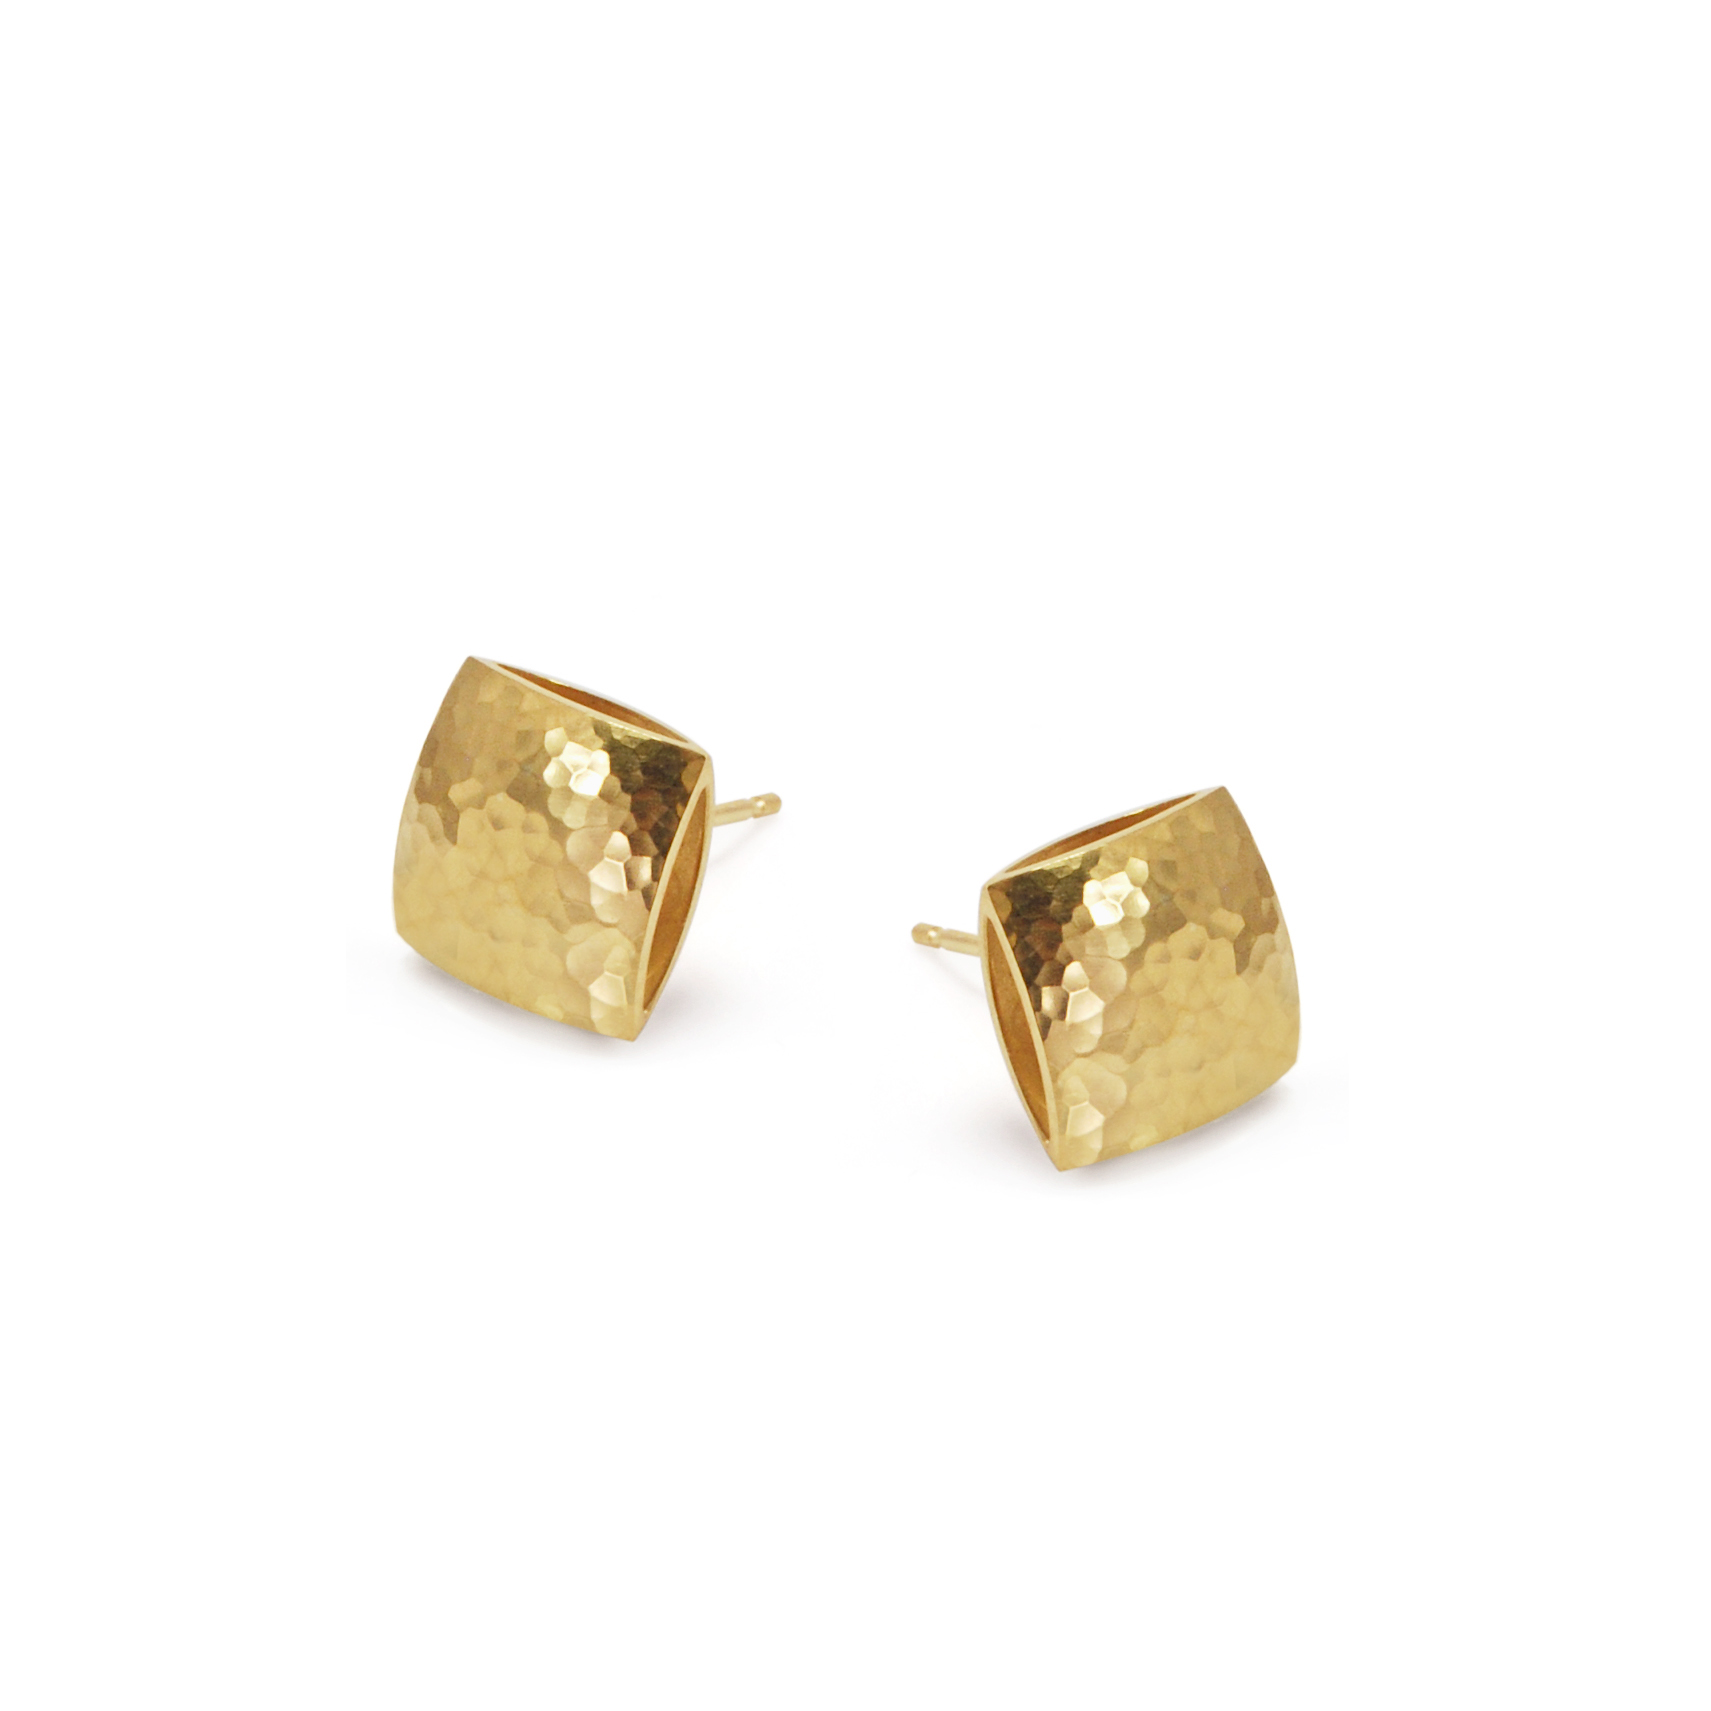 Gold plated pillow studs - Heather O'Connor